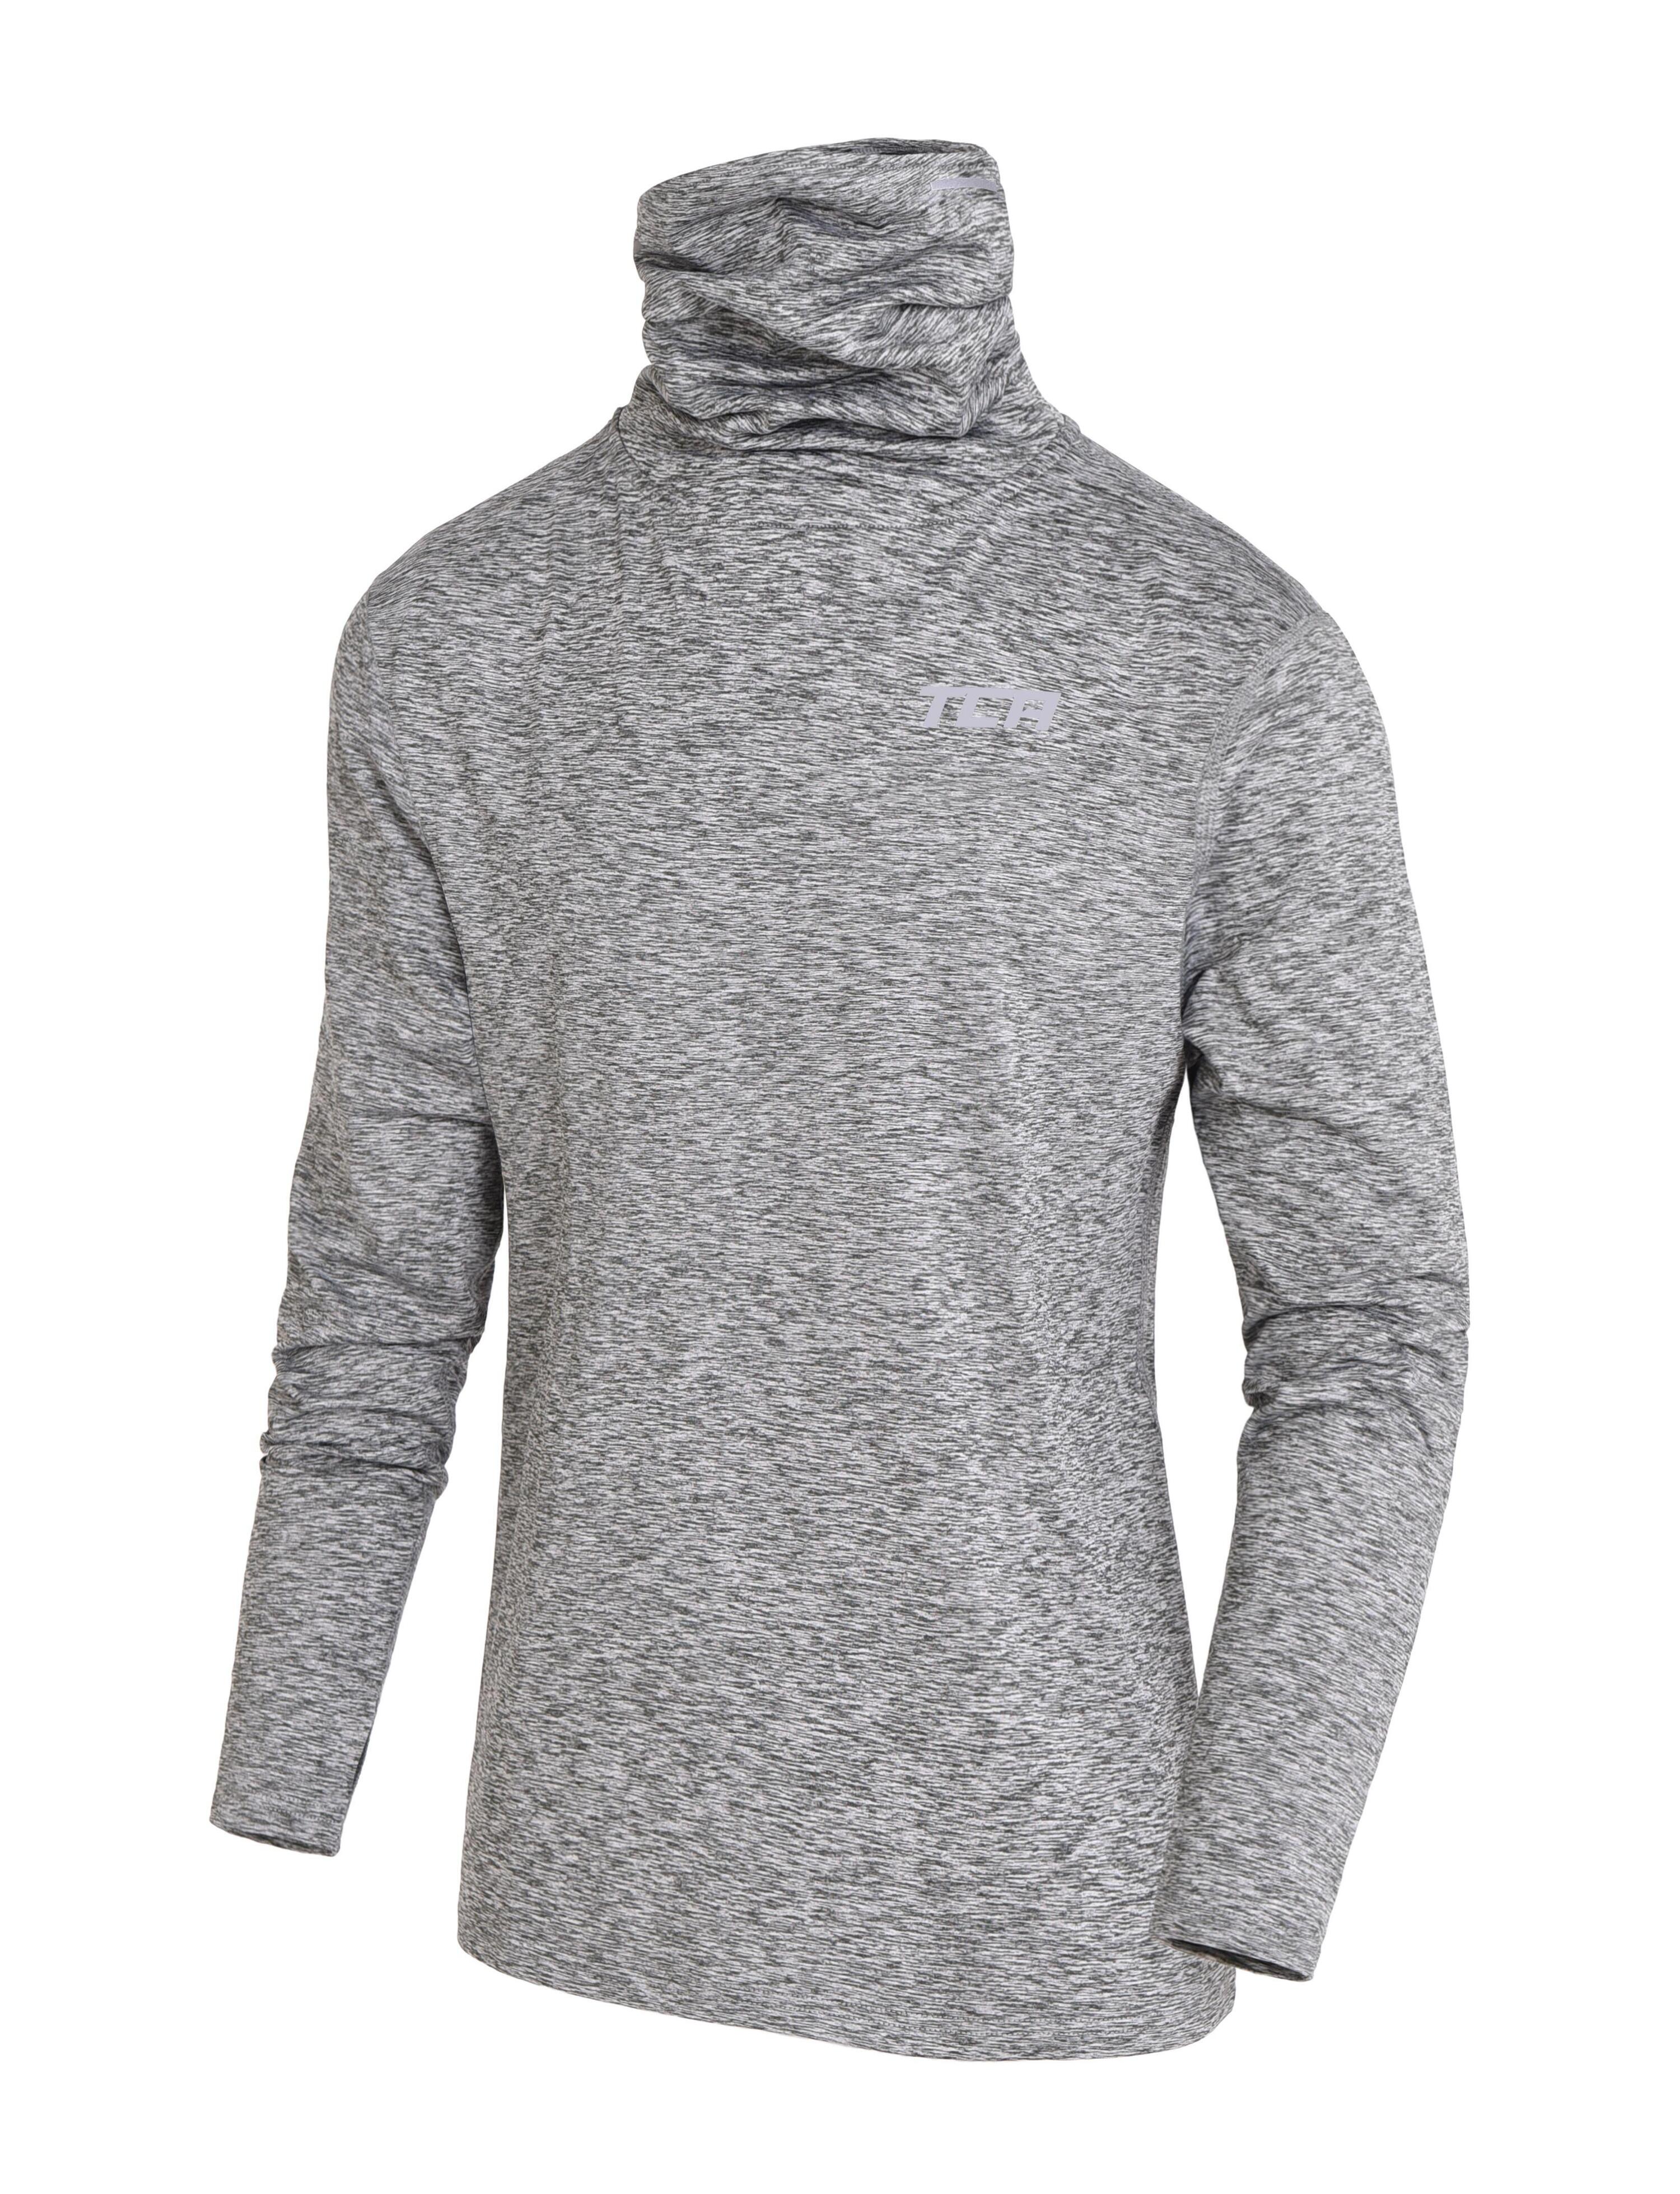 Boy’s Thermal Funnel Neck Top - Quiet Shade Marl 2/5